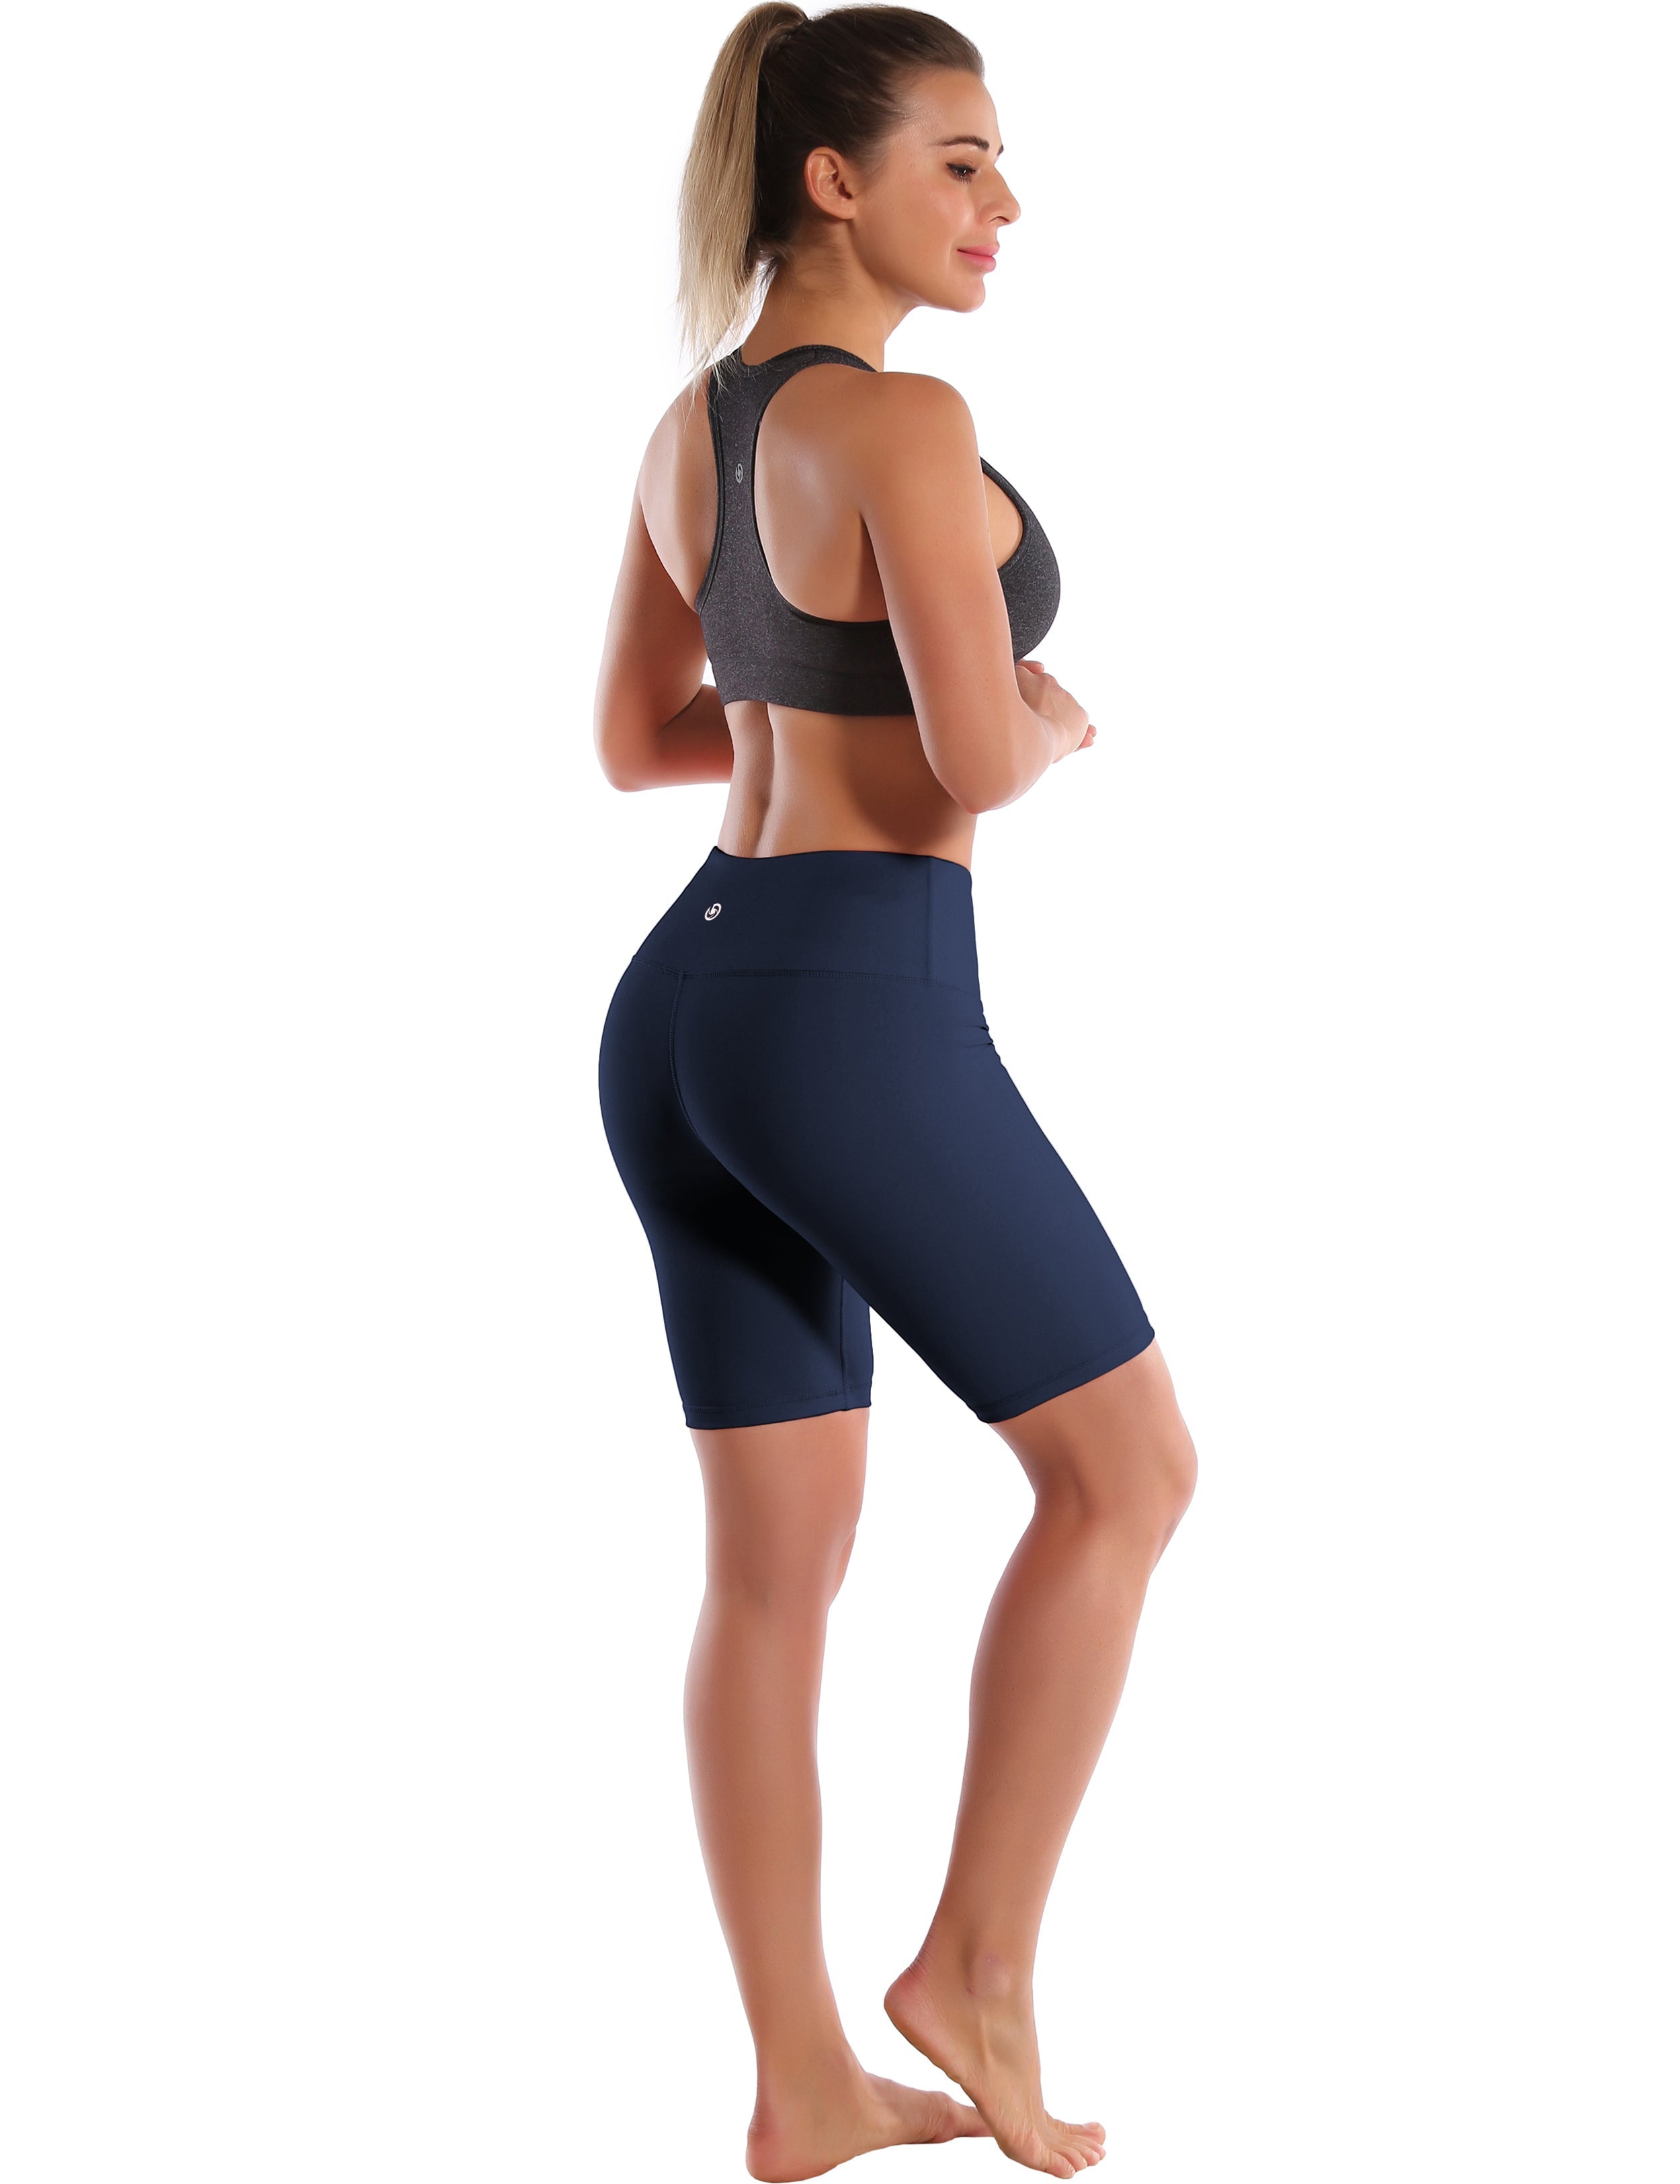 8" High Waist Tall Size Shorts darknavy Sleek, soft, smooth and totally comfortable: our newest style is here. Softest-ever fabric High elasticity High density 4-way stretch Fabric doesn't attract lint easily No see-through Moisture-wicking Machine wash 75% Nylon, 25% Spandex